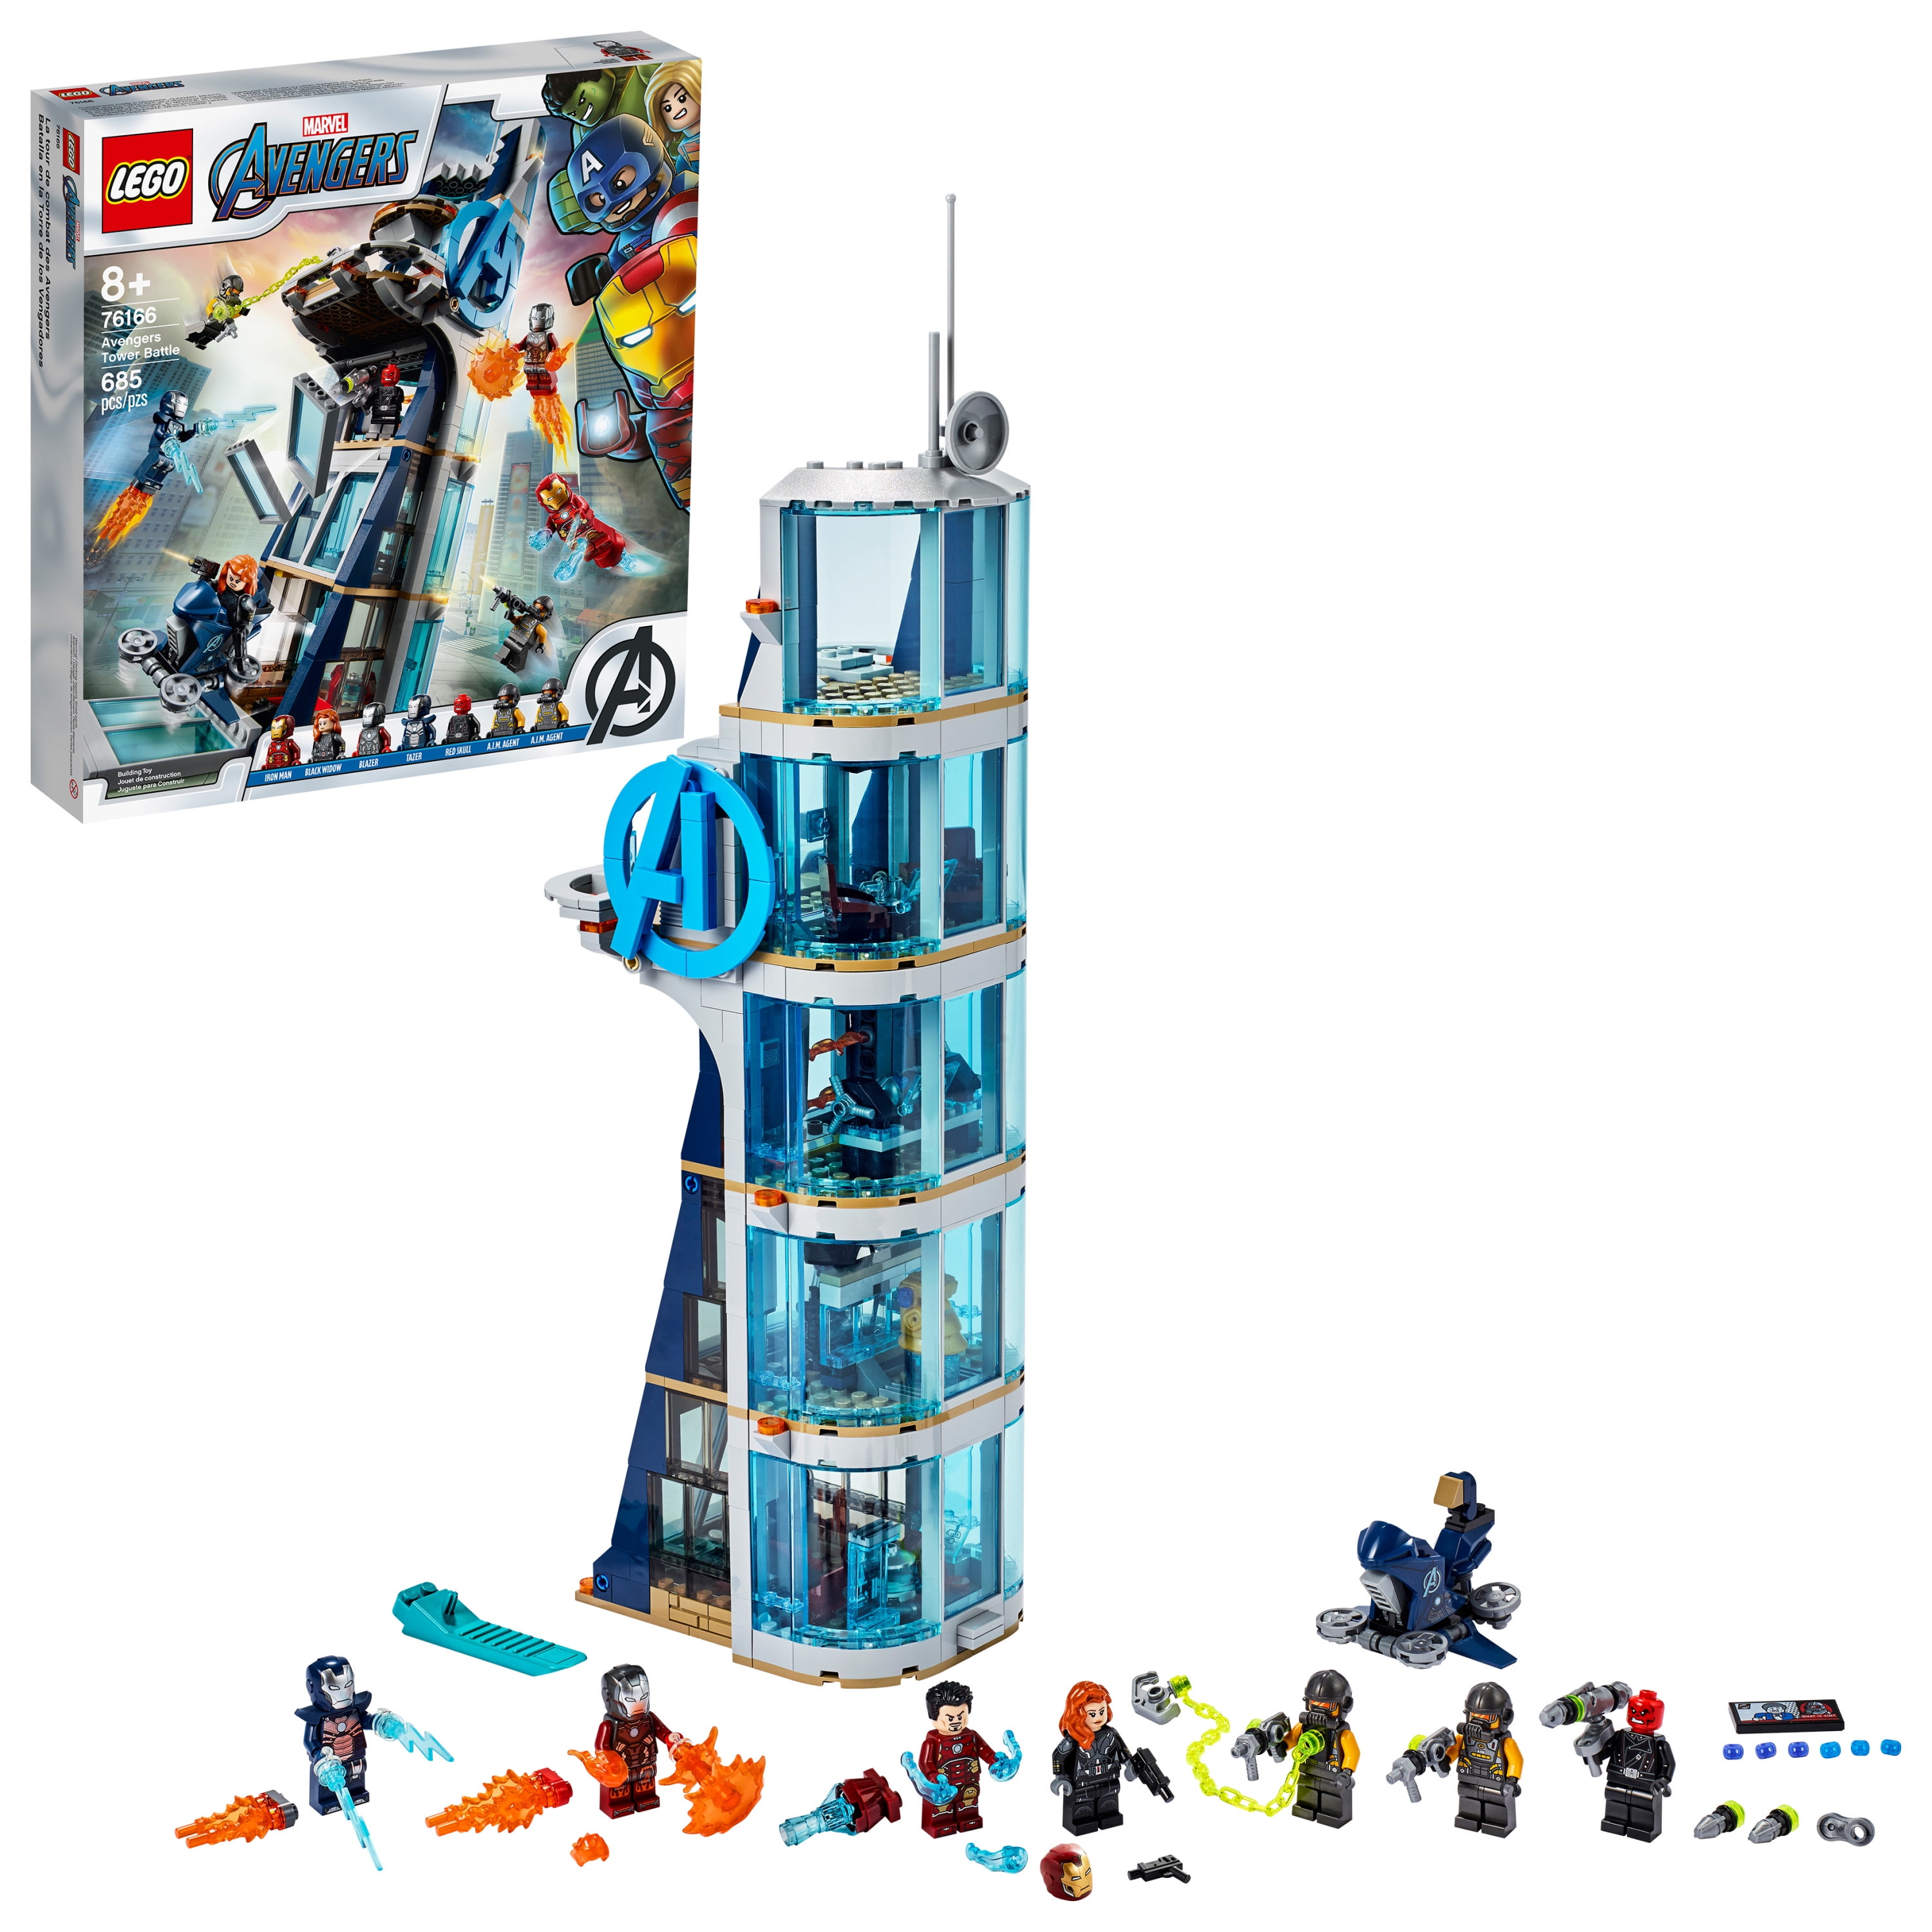 lego-marvel-avengers-avengers-tower-battle-76166-brick-building-toy-with-action-scenes-687